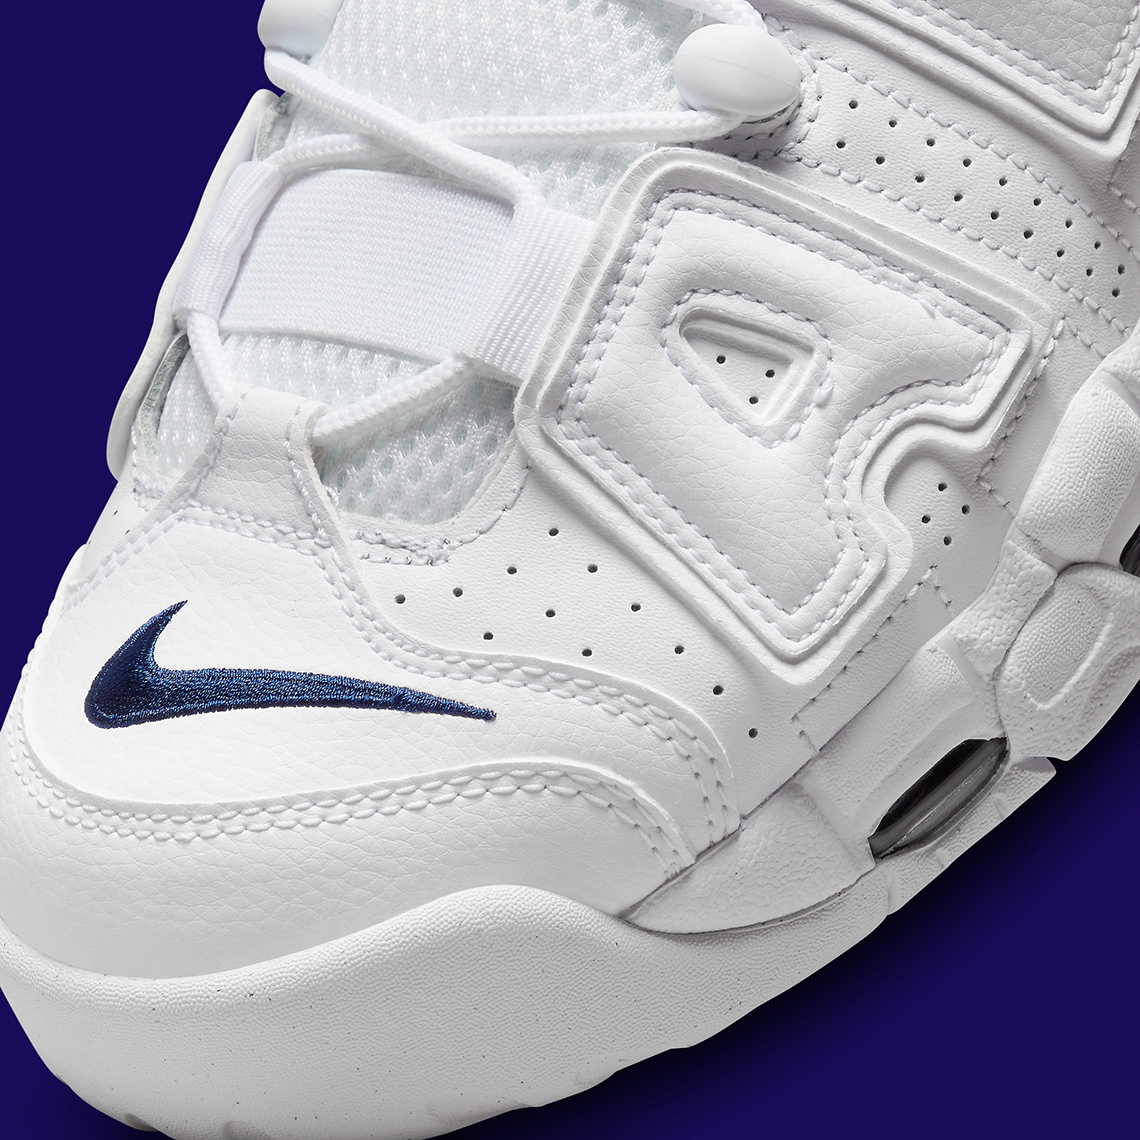 Nike Air More Uptempo White Navy Dh8011 100 3